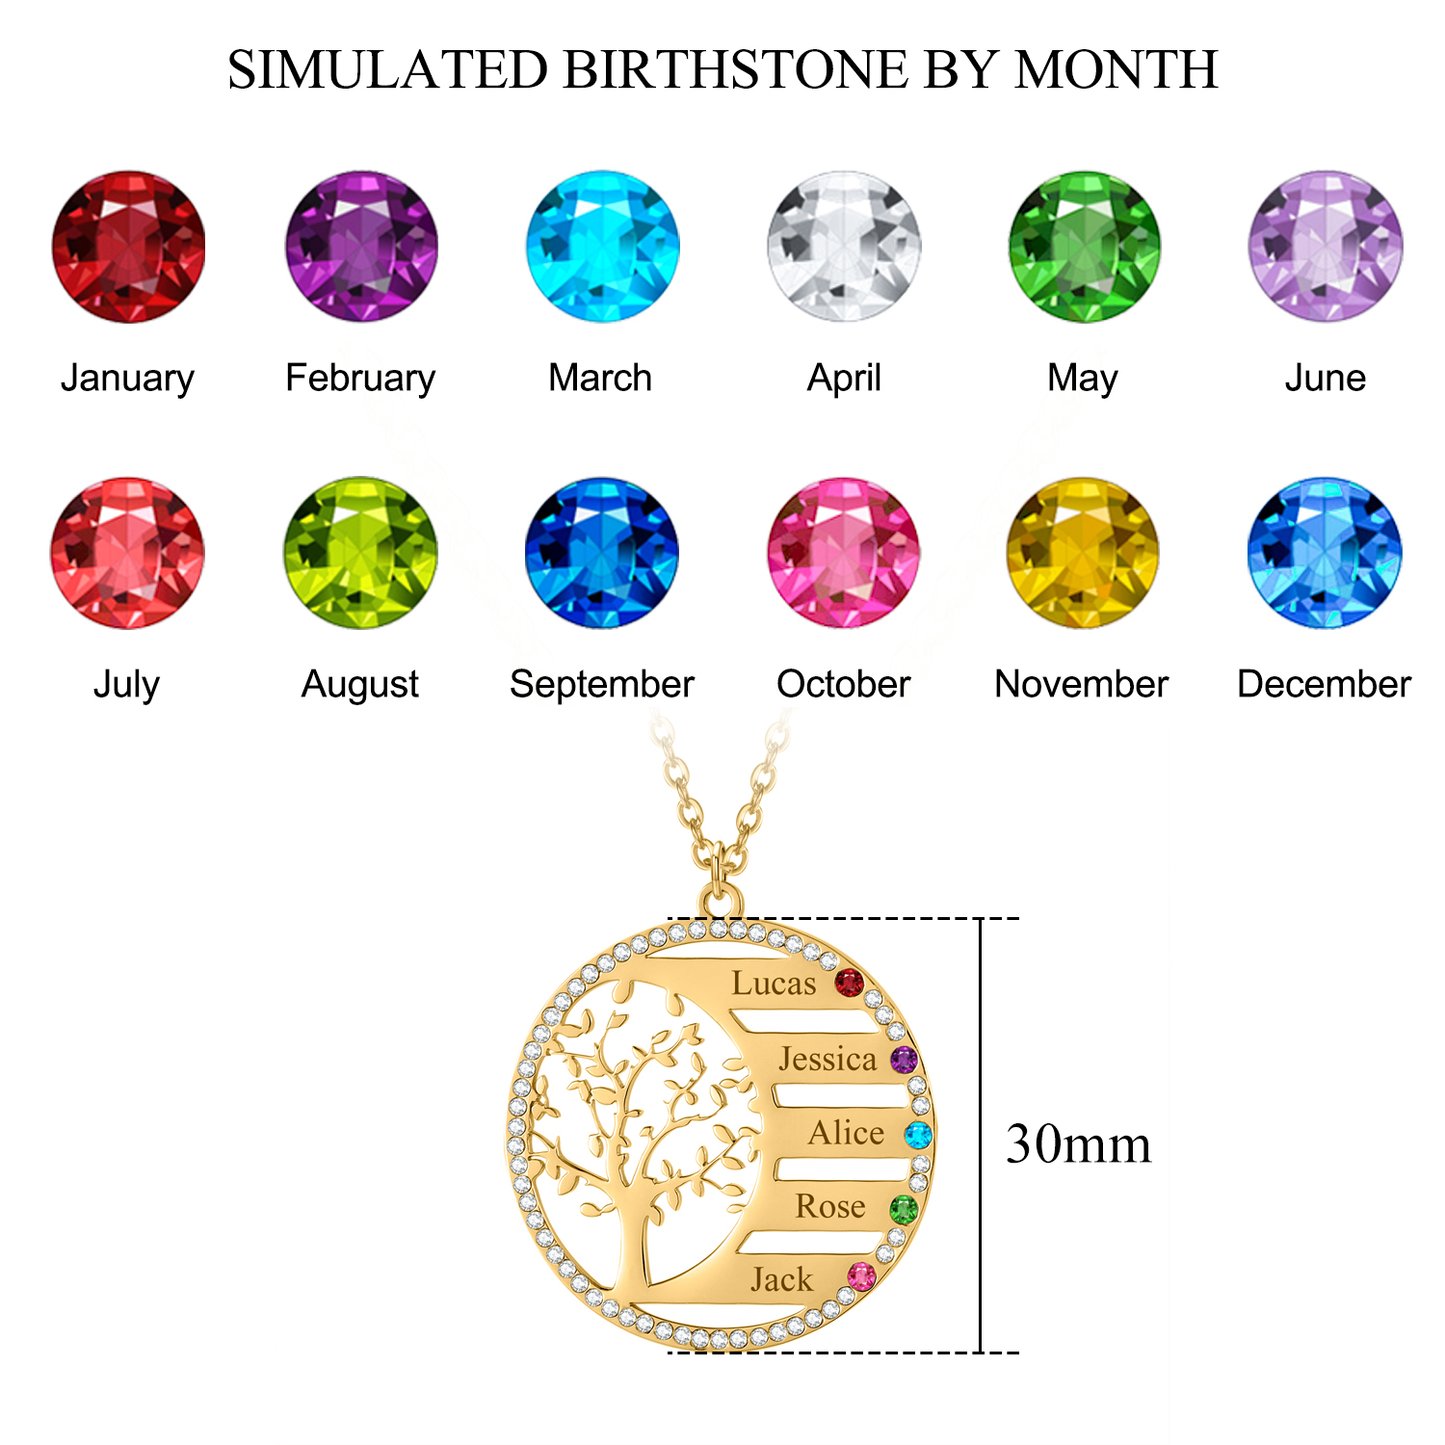 Family Tree Name Pendant With Birthstone QN20336